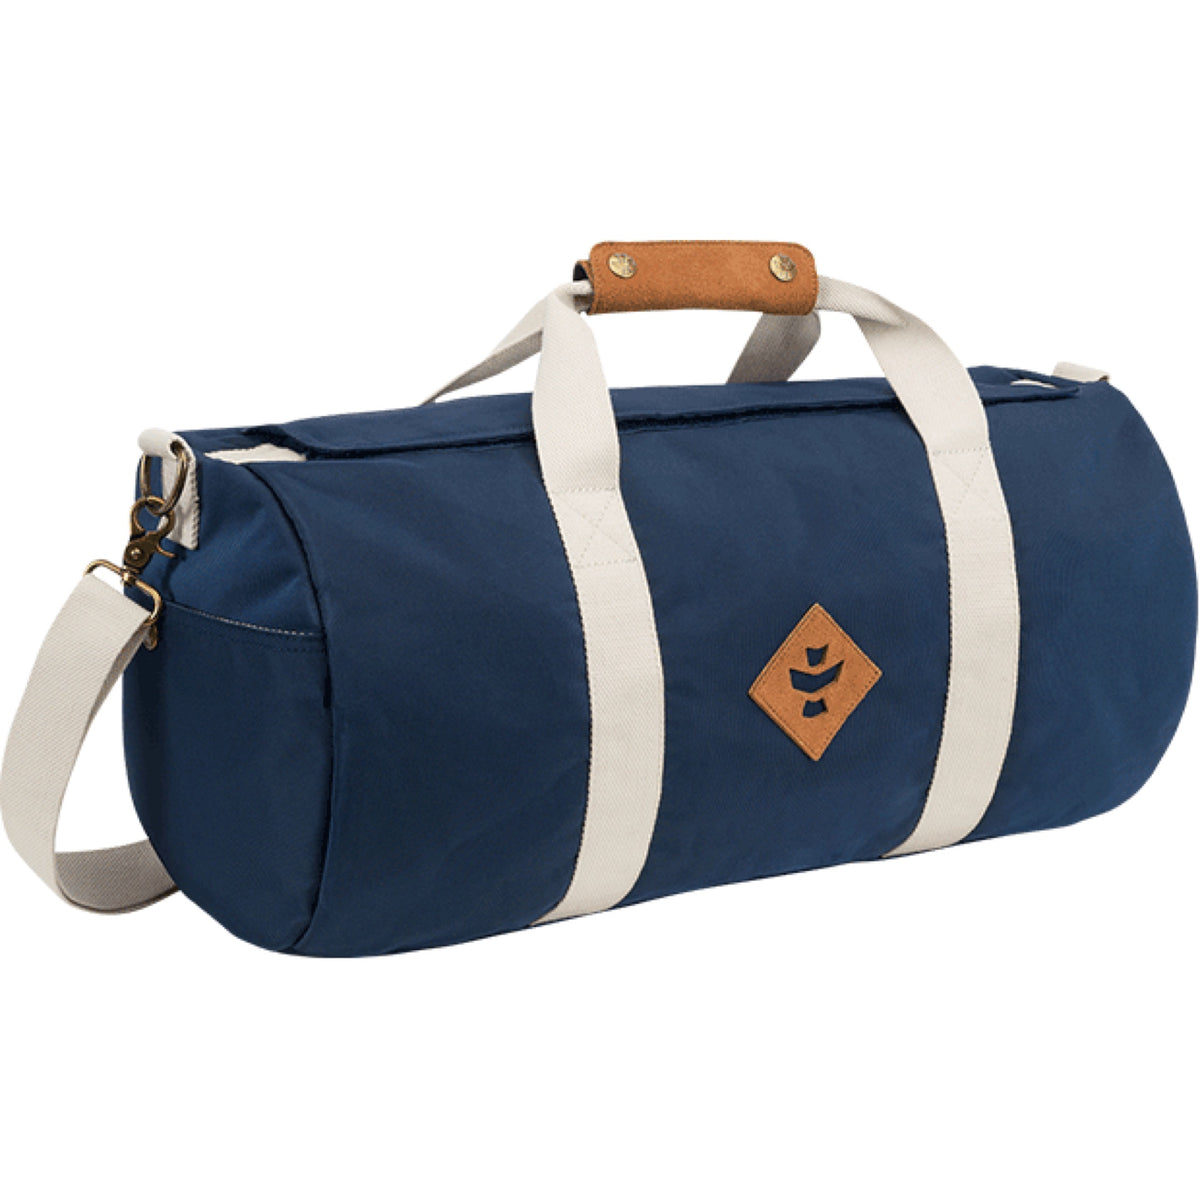 Revelry Overnighter Smell-Proof Duffle Bag– CaliConnected